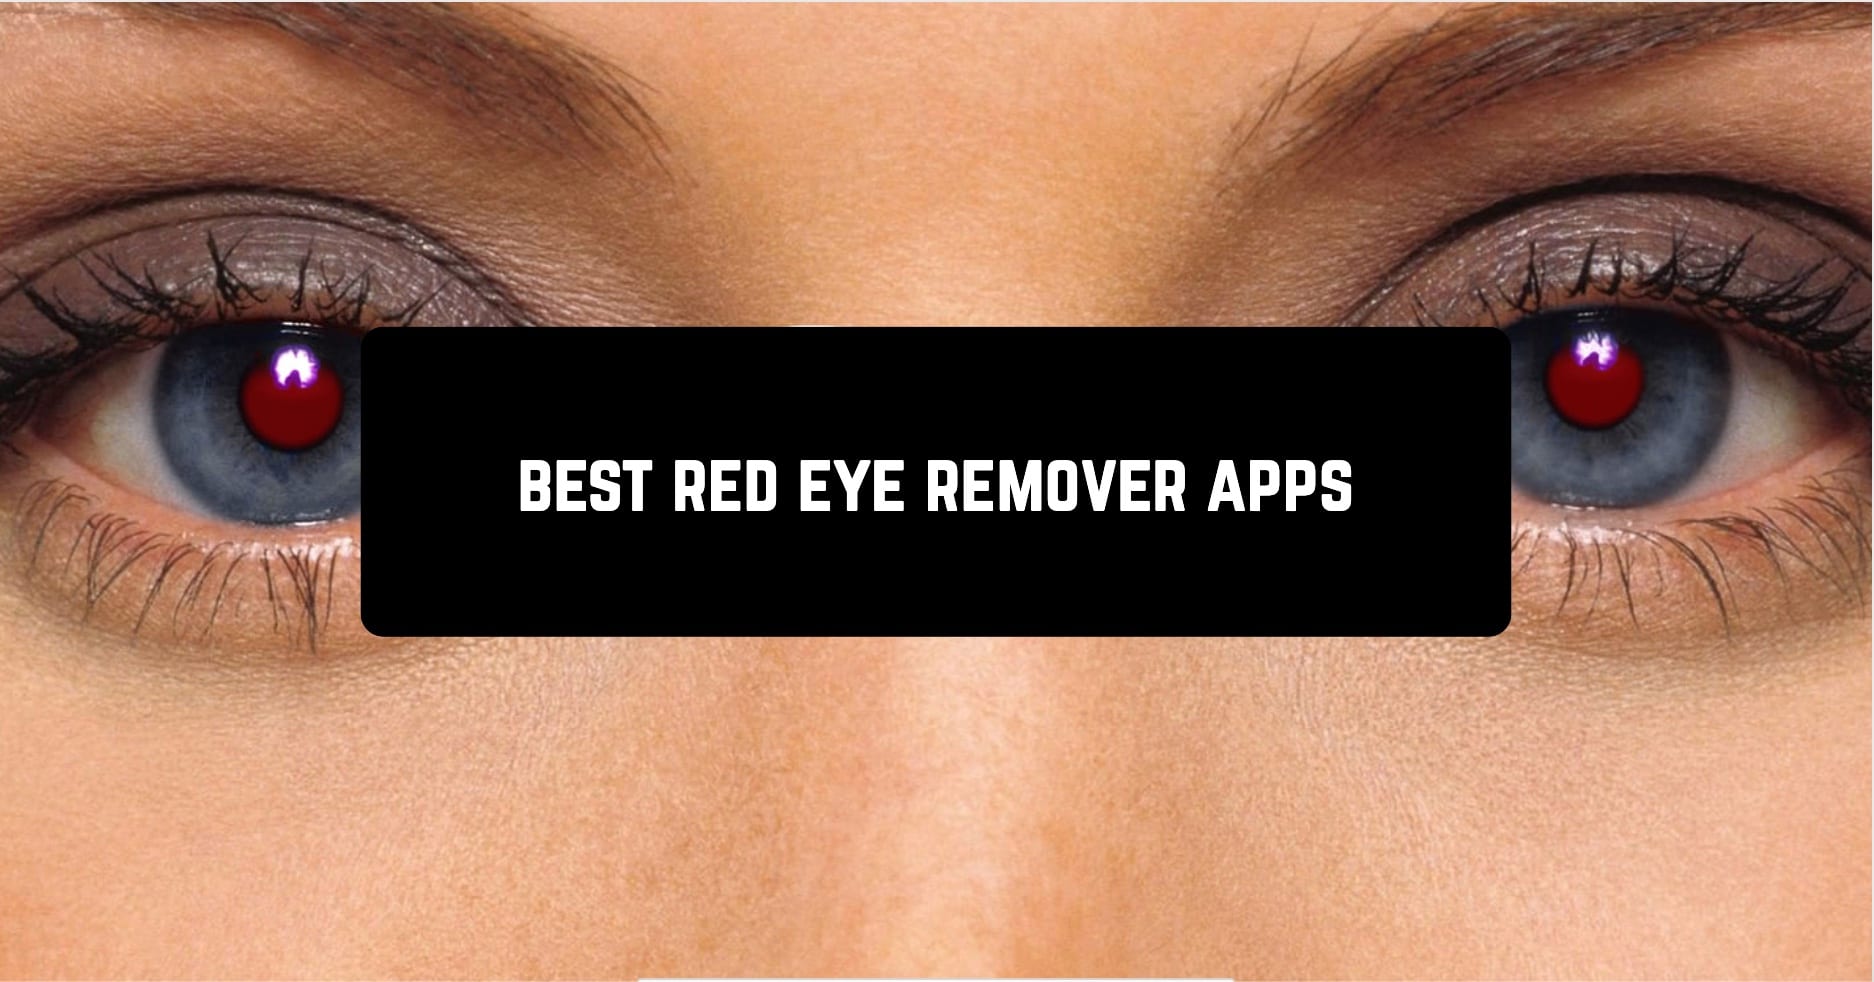 Best red eye remover apps for Android